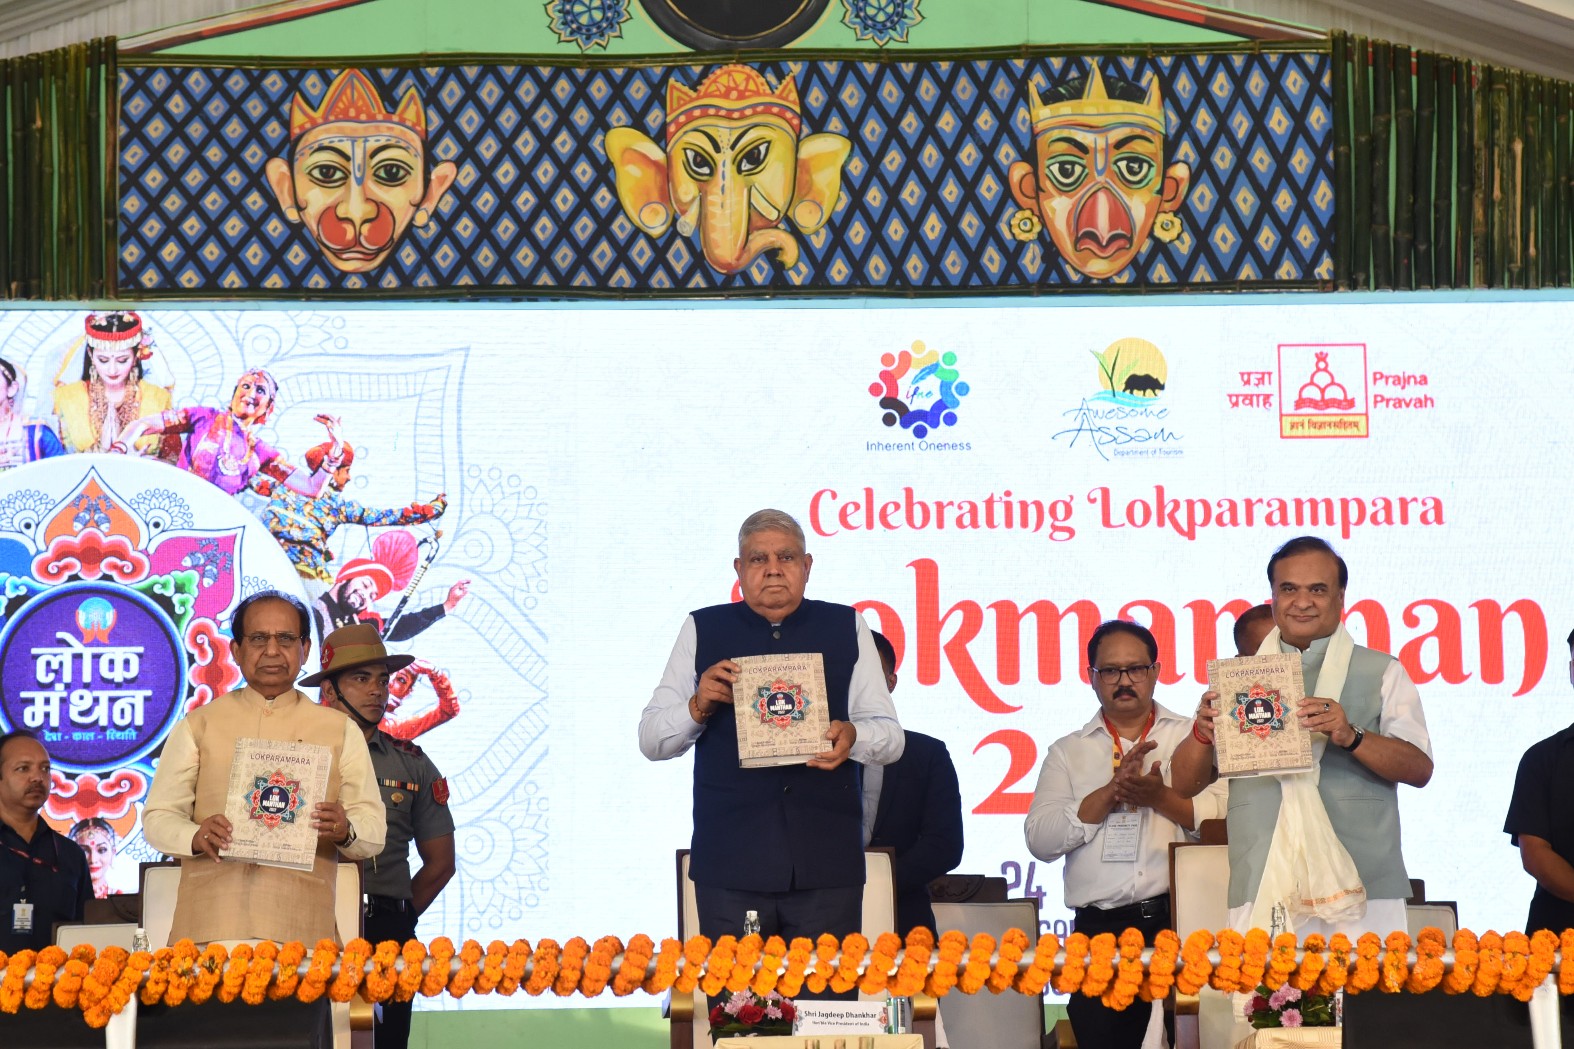 The Vice President, Shri Jagdeep Dhankhar releasing the third edition of Lokparampara during Lokmanthan in Guwahati, Assam on September 22, 2022.